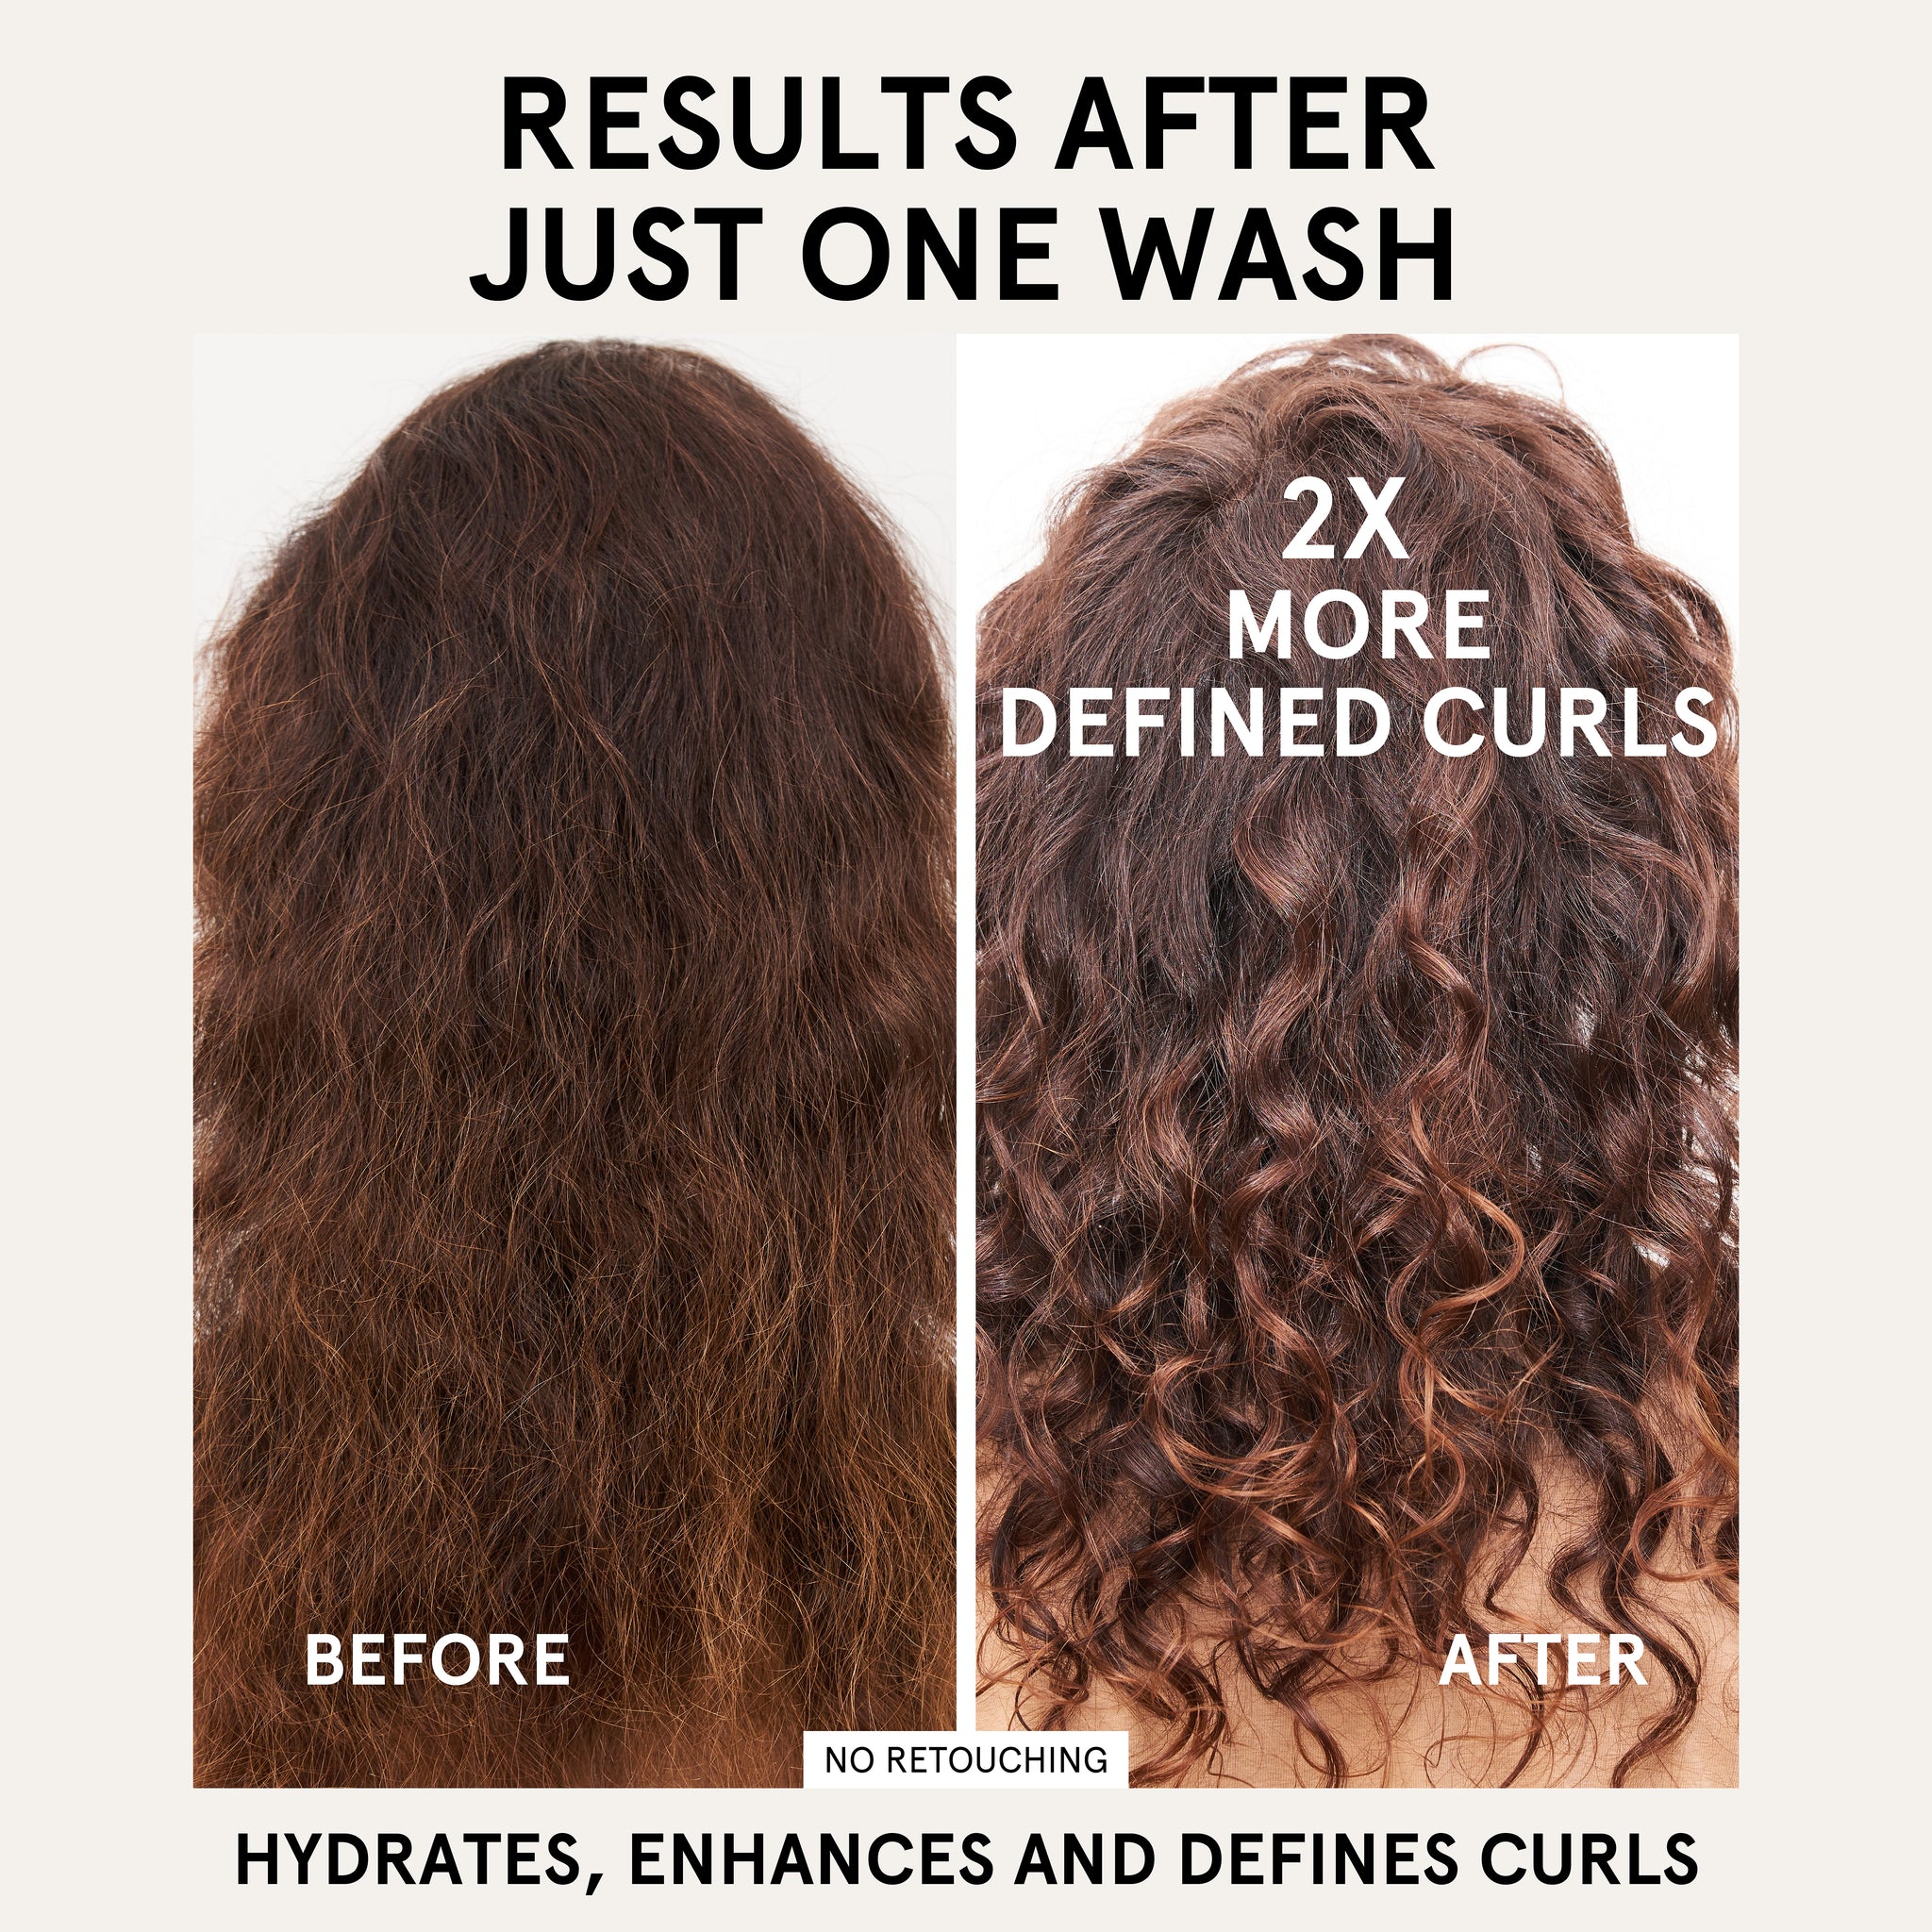 S08+C08 Solid Shampoo & Conditioner Set for Curly, Wavy And Coily Hair